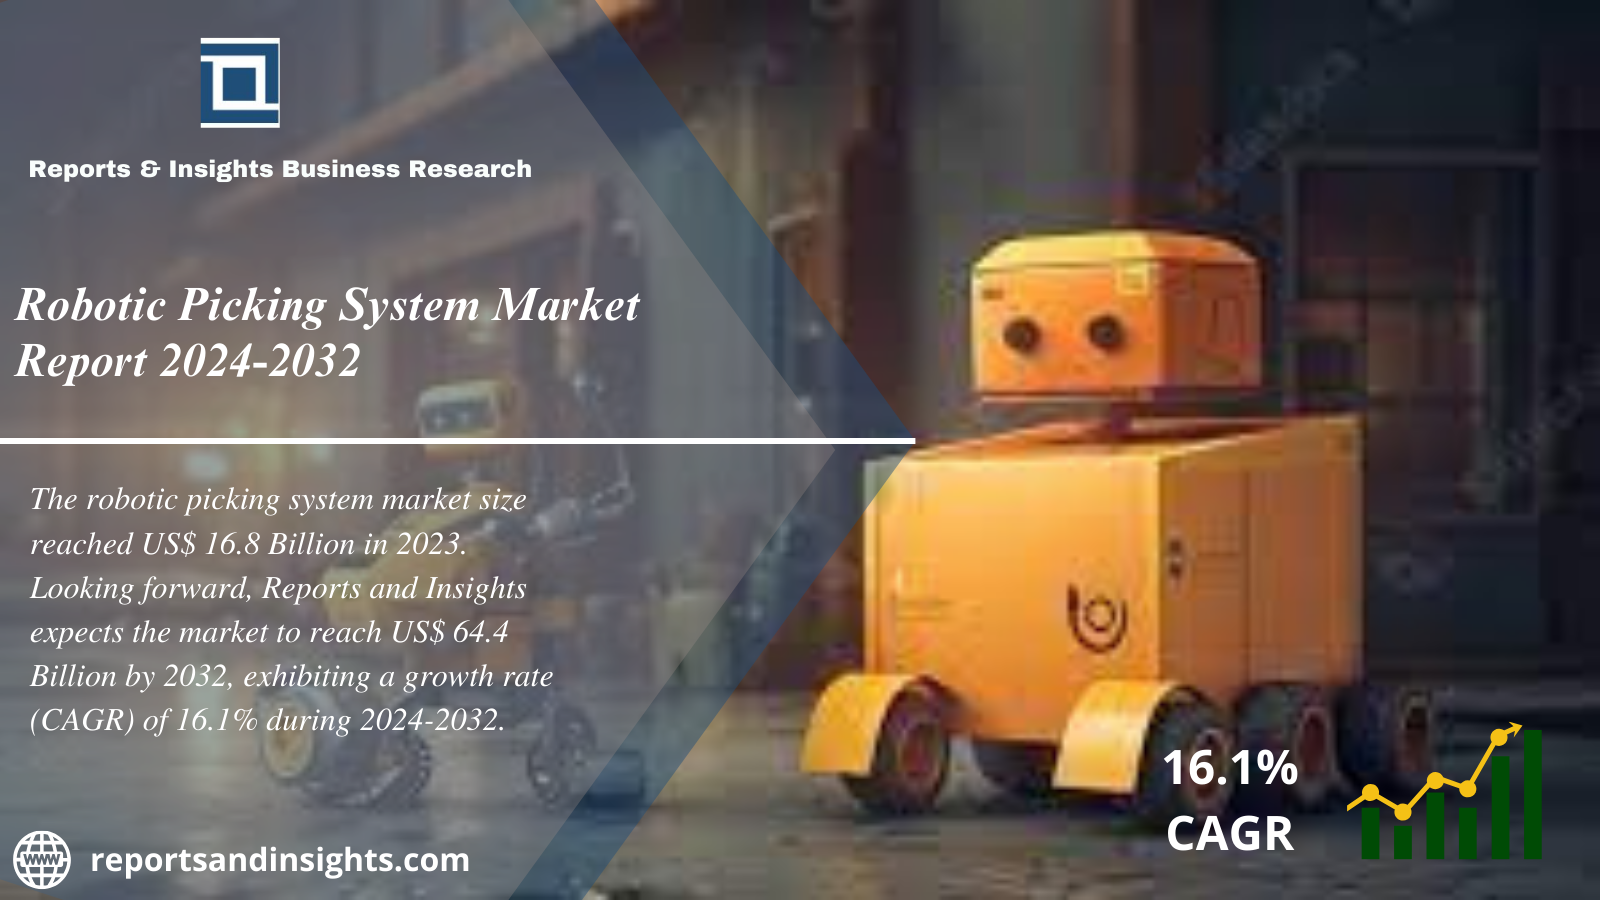 Robotic Picking System Market 2024 to 2032: Share, Size, Growth, Trends and Leading Key Players